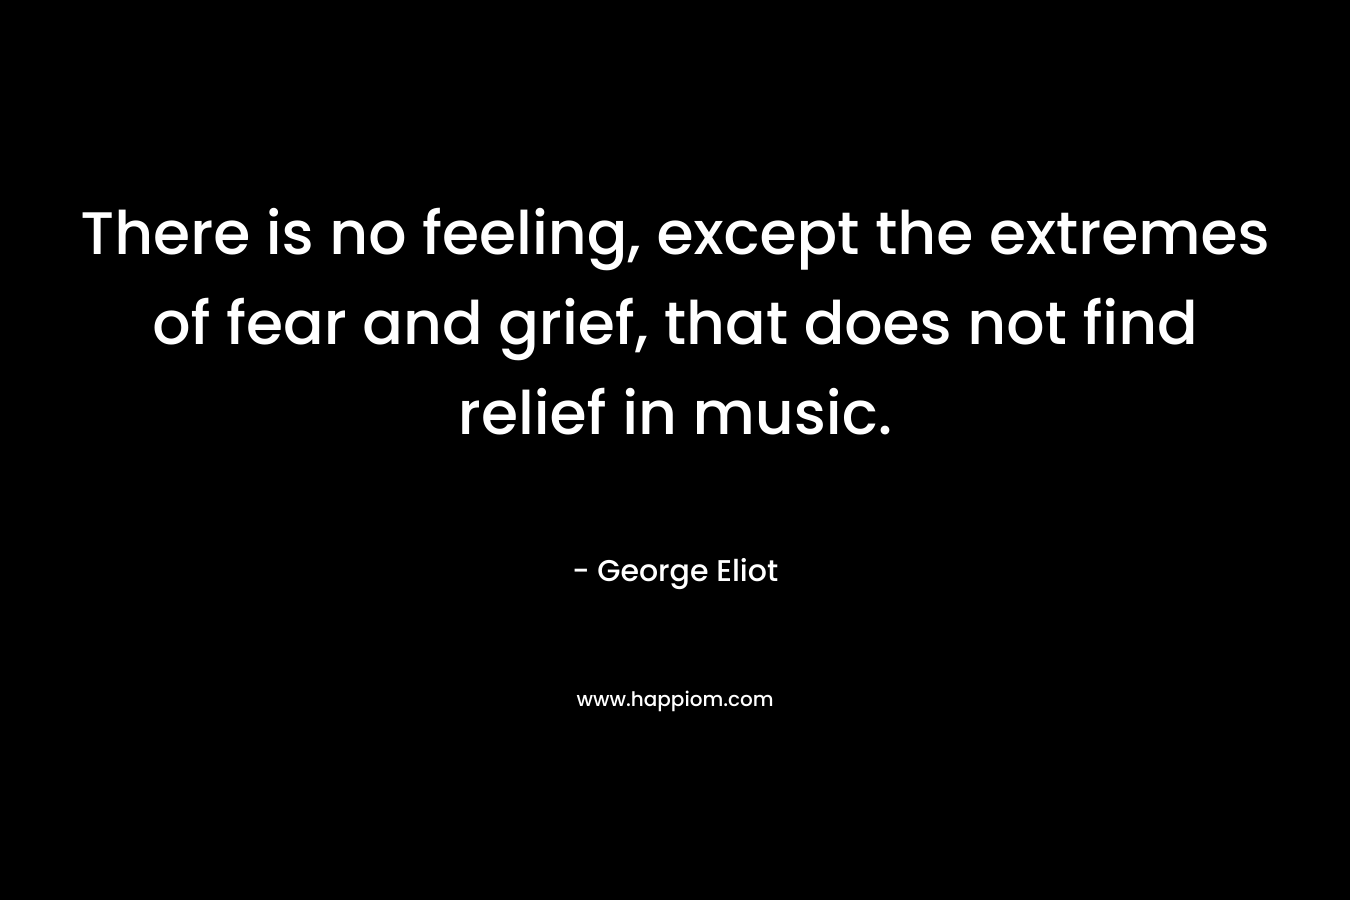 There is no feeling, except the extremes of fear and grief, that does not find relief in music.